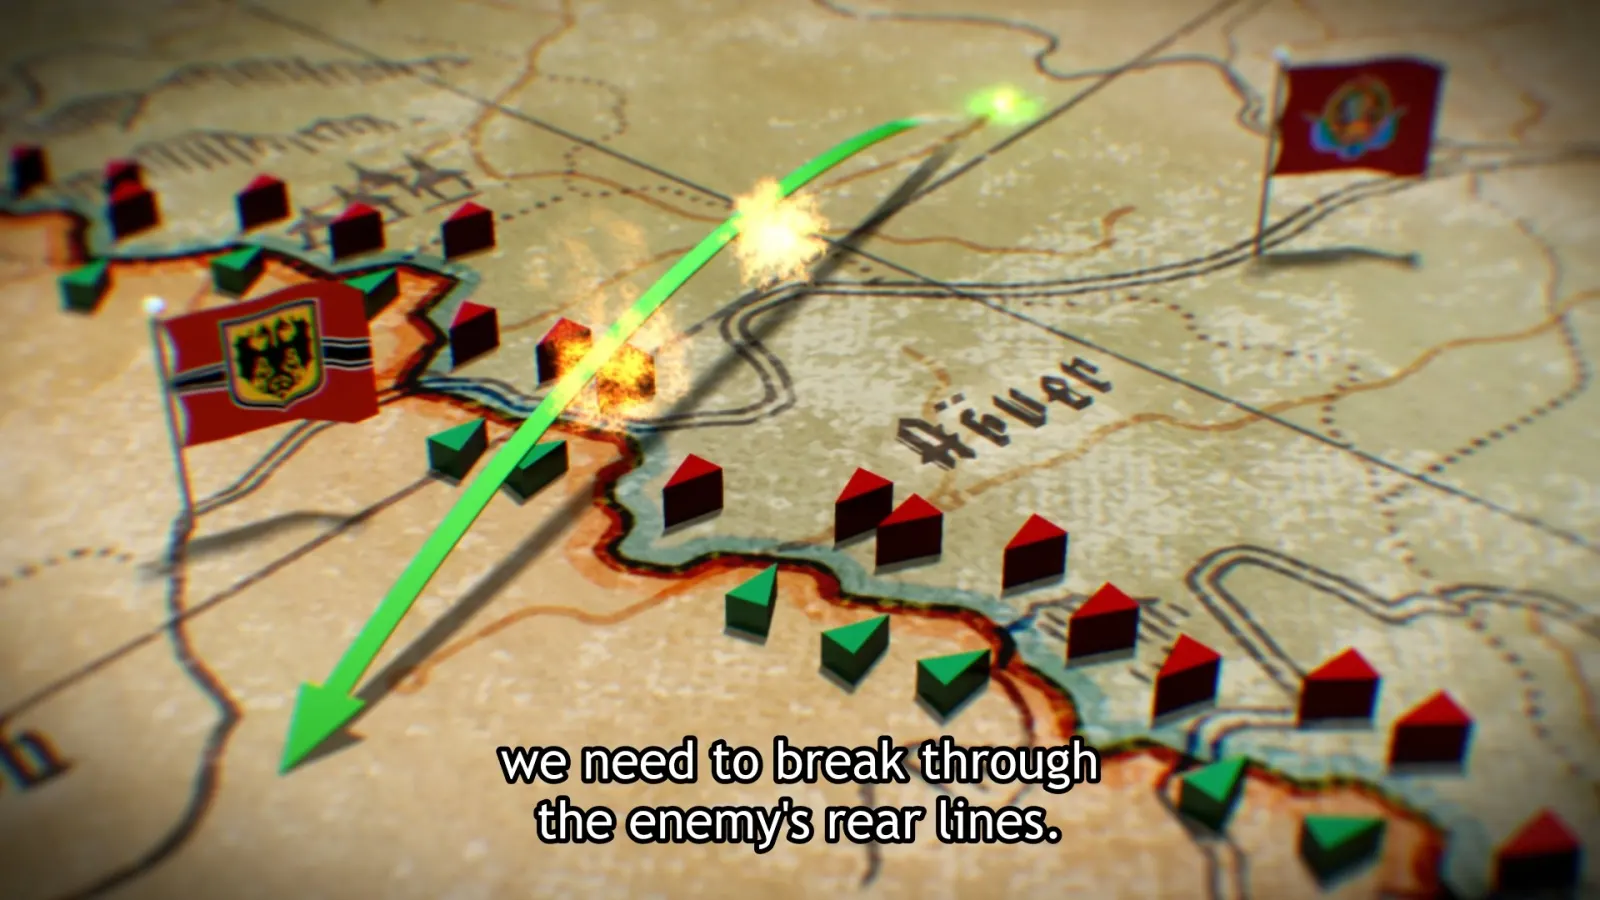 STRATEGY because this is a SERIOUS WAR FILM